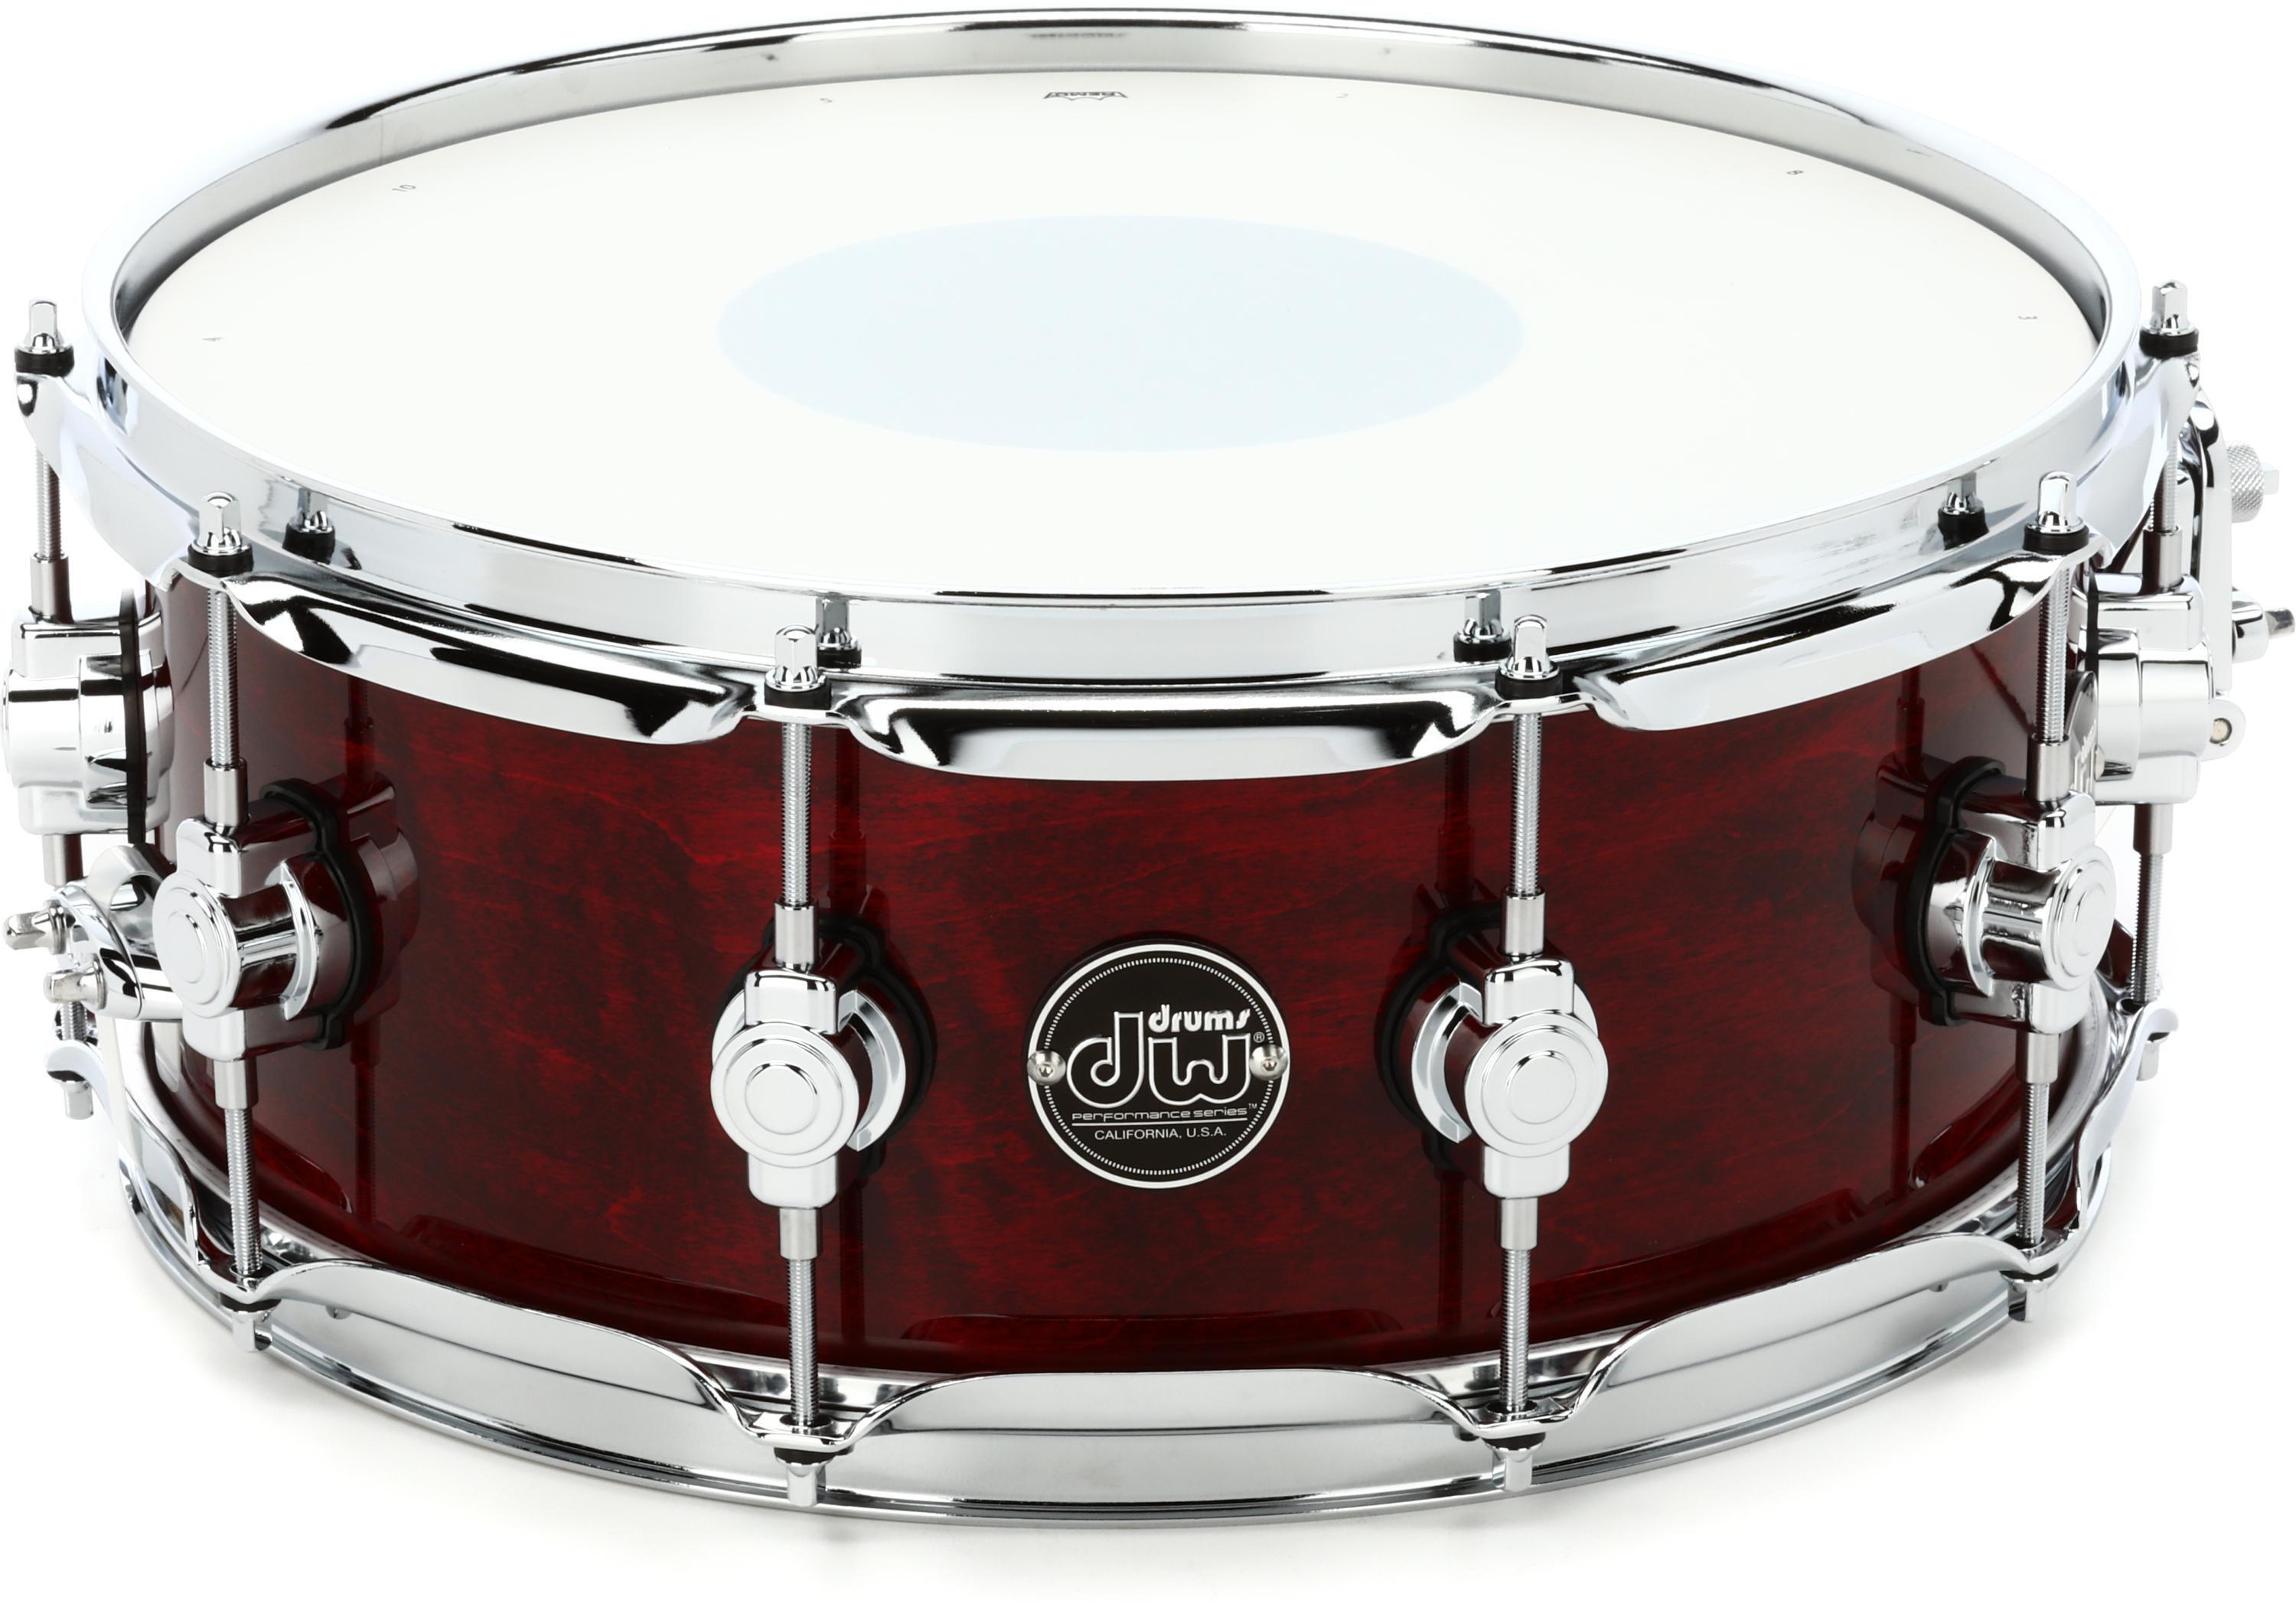 Performance Series Snare Drum - 5.5 x 14 inch - Cherry Stain